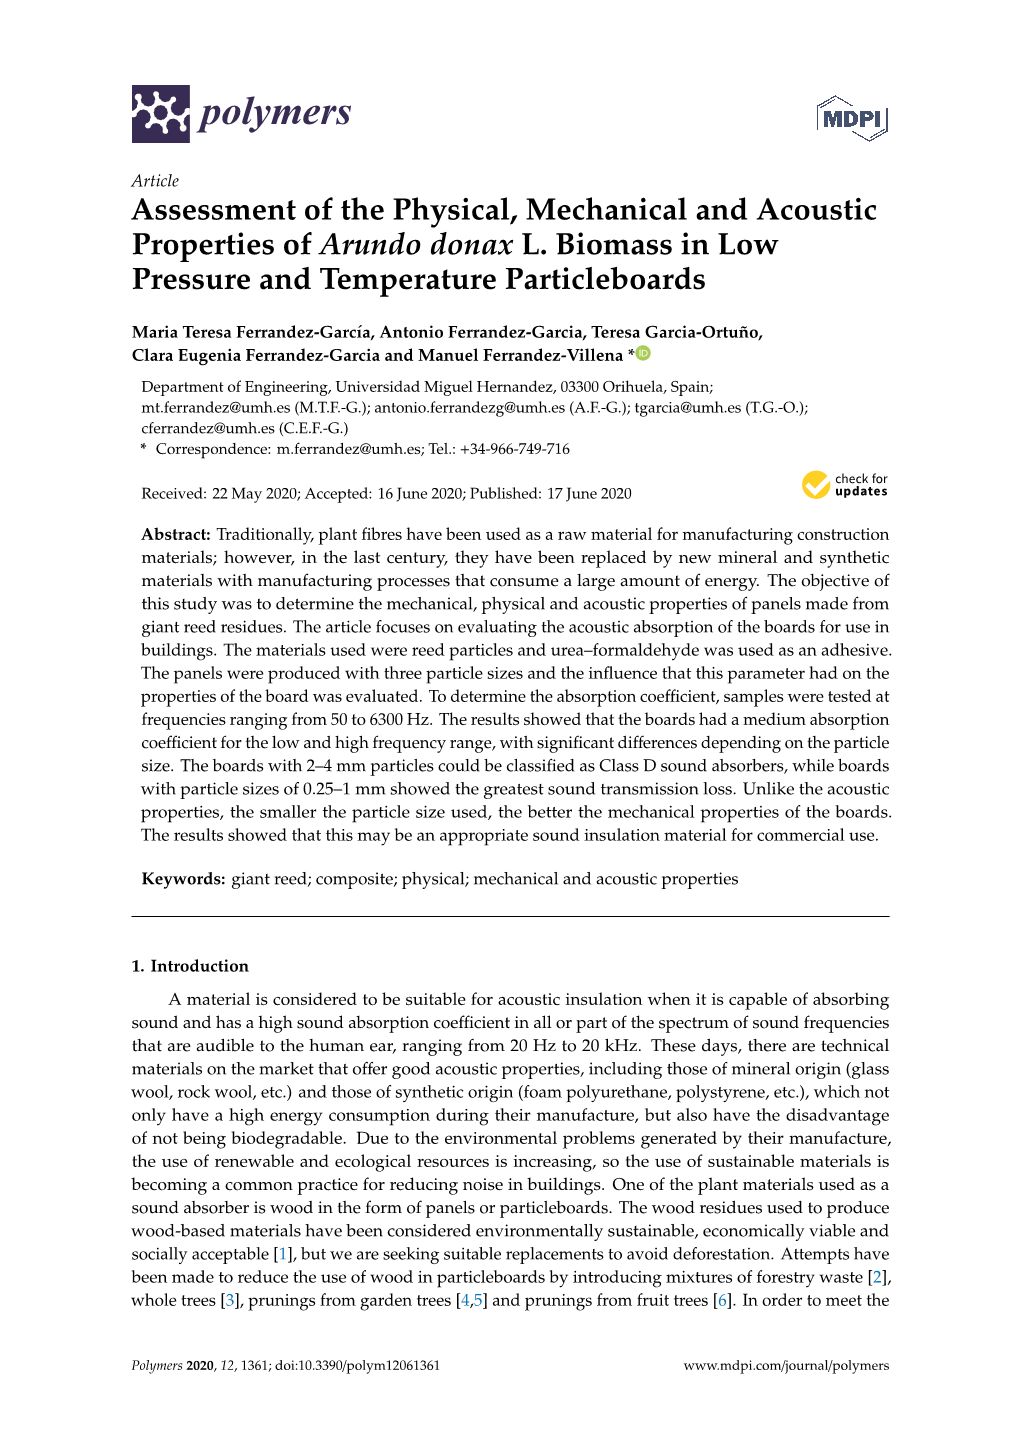 Assessment of the Physical, Mechanical and Acoustic Properties of Arundo Donax L